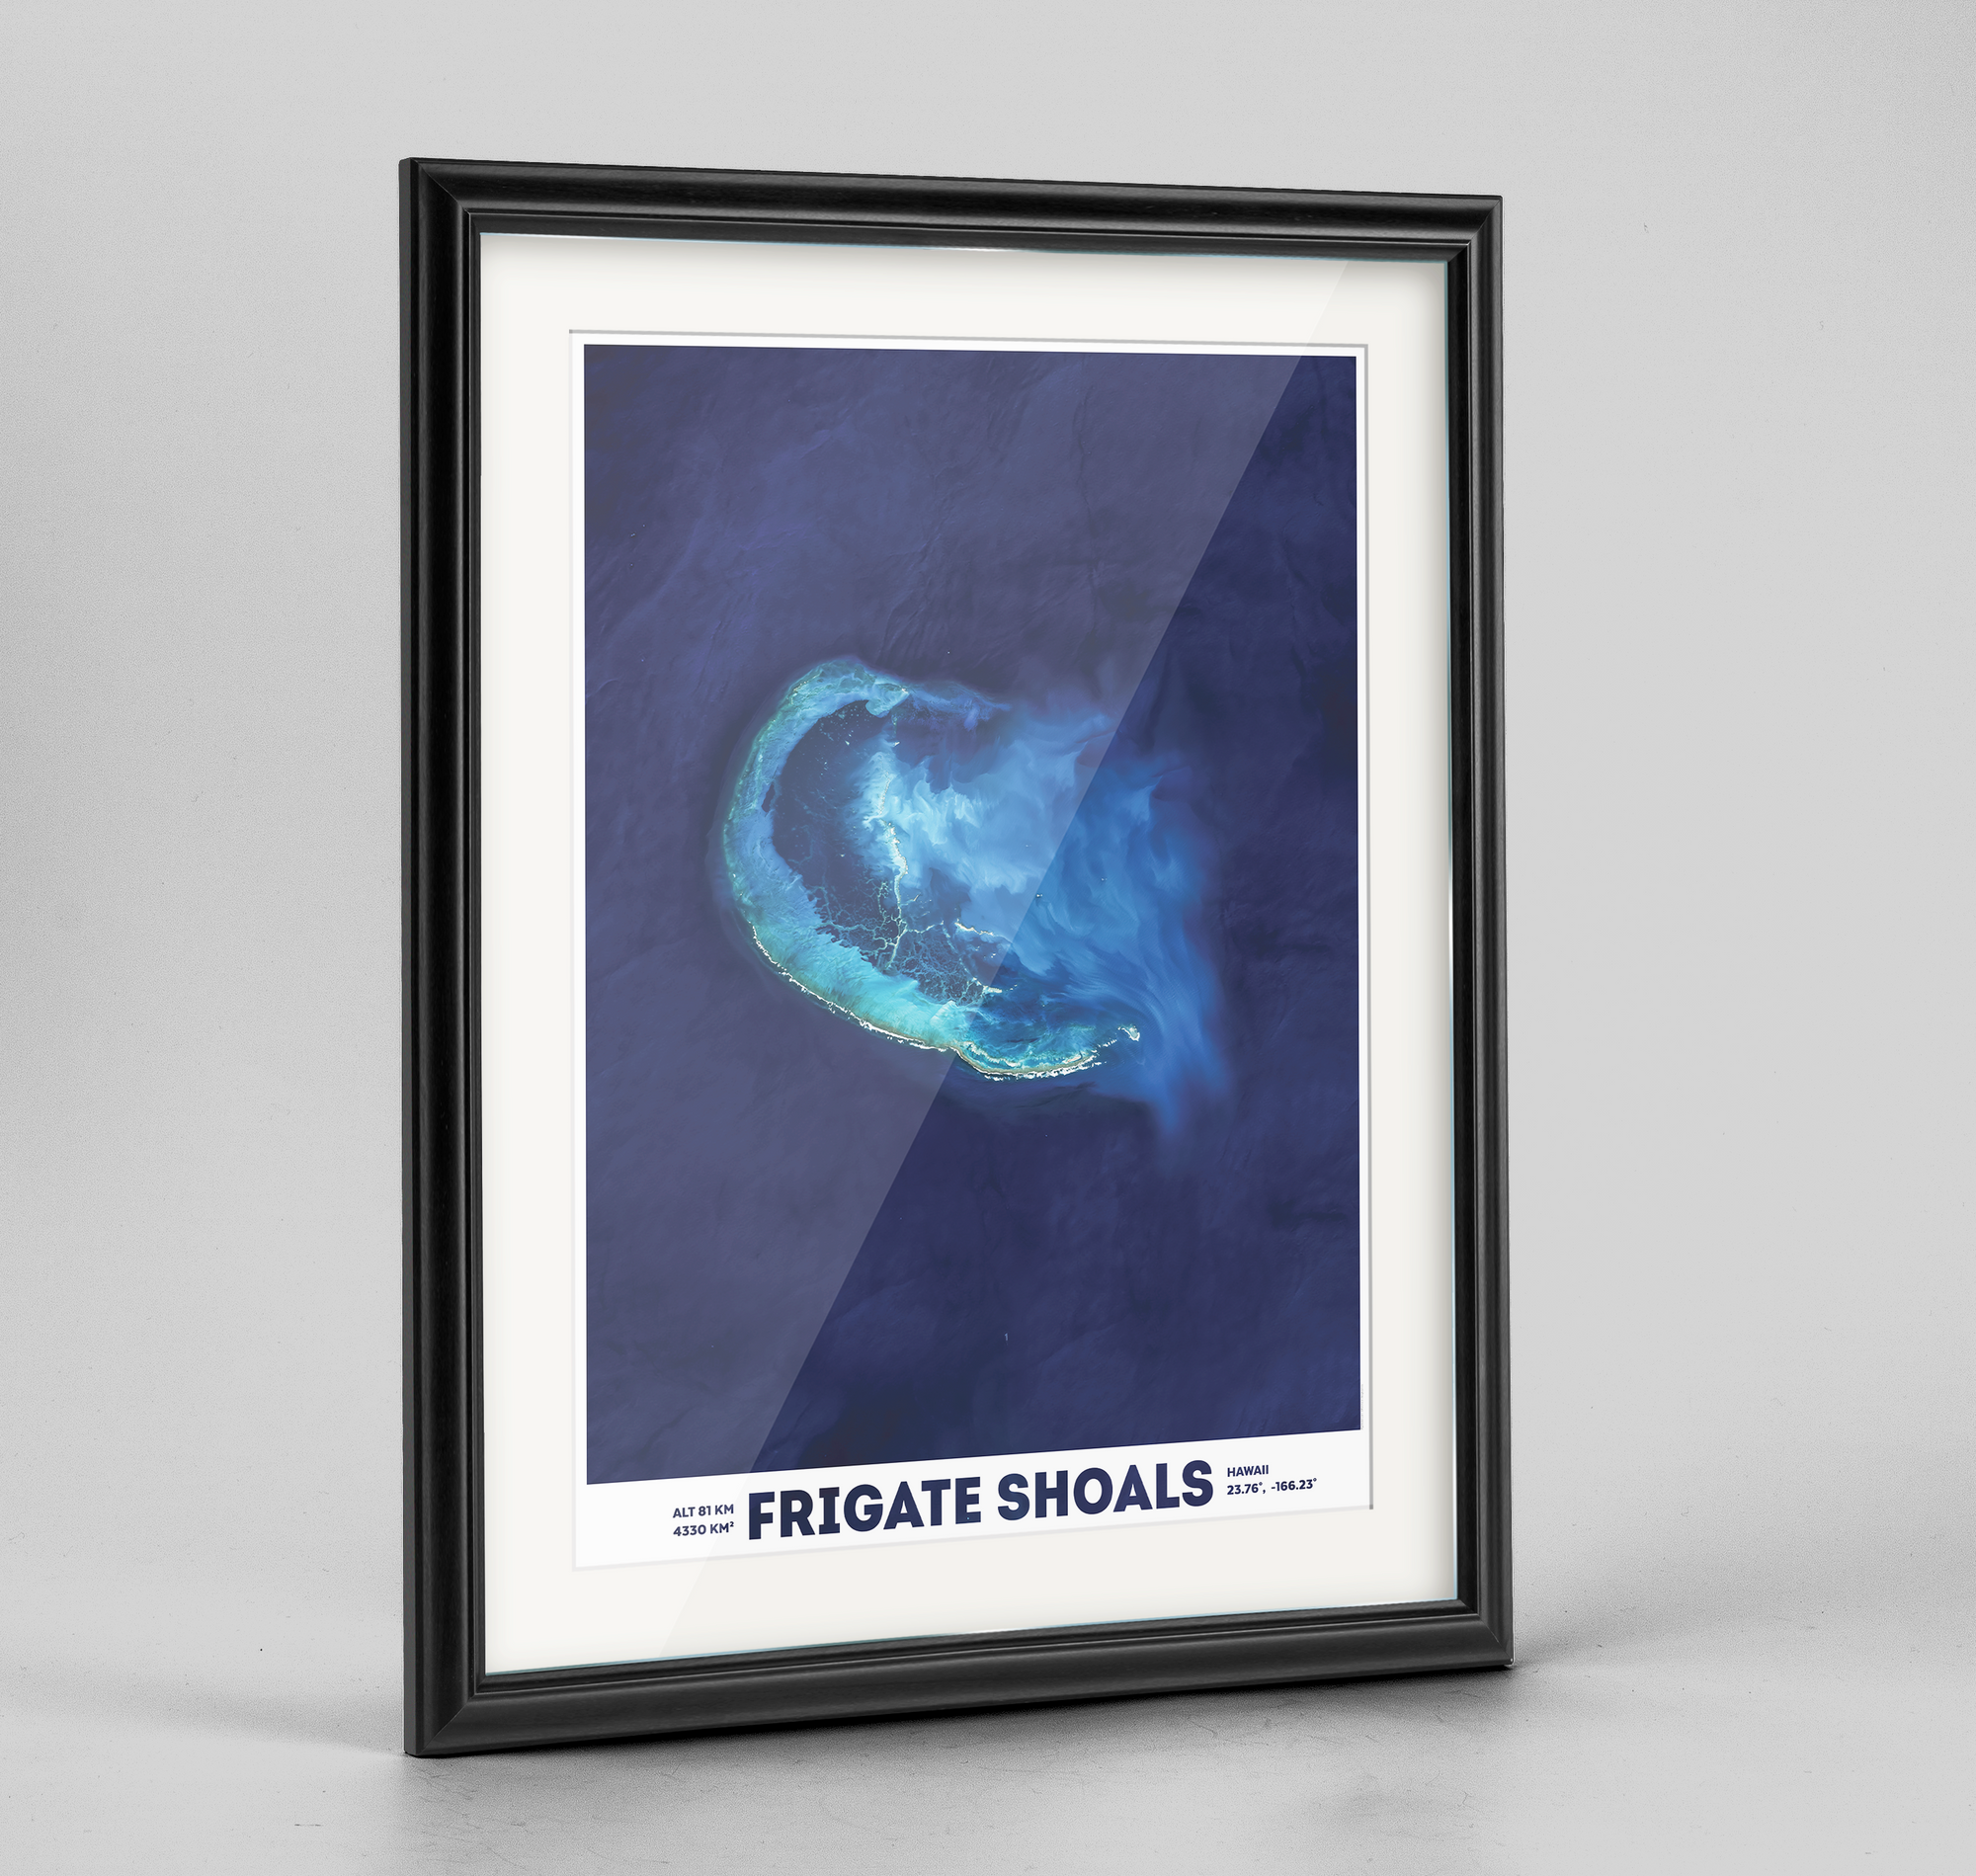 Frigate Shoals Earth Photography - Art Print - Point Two Design